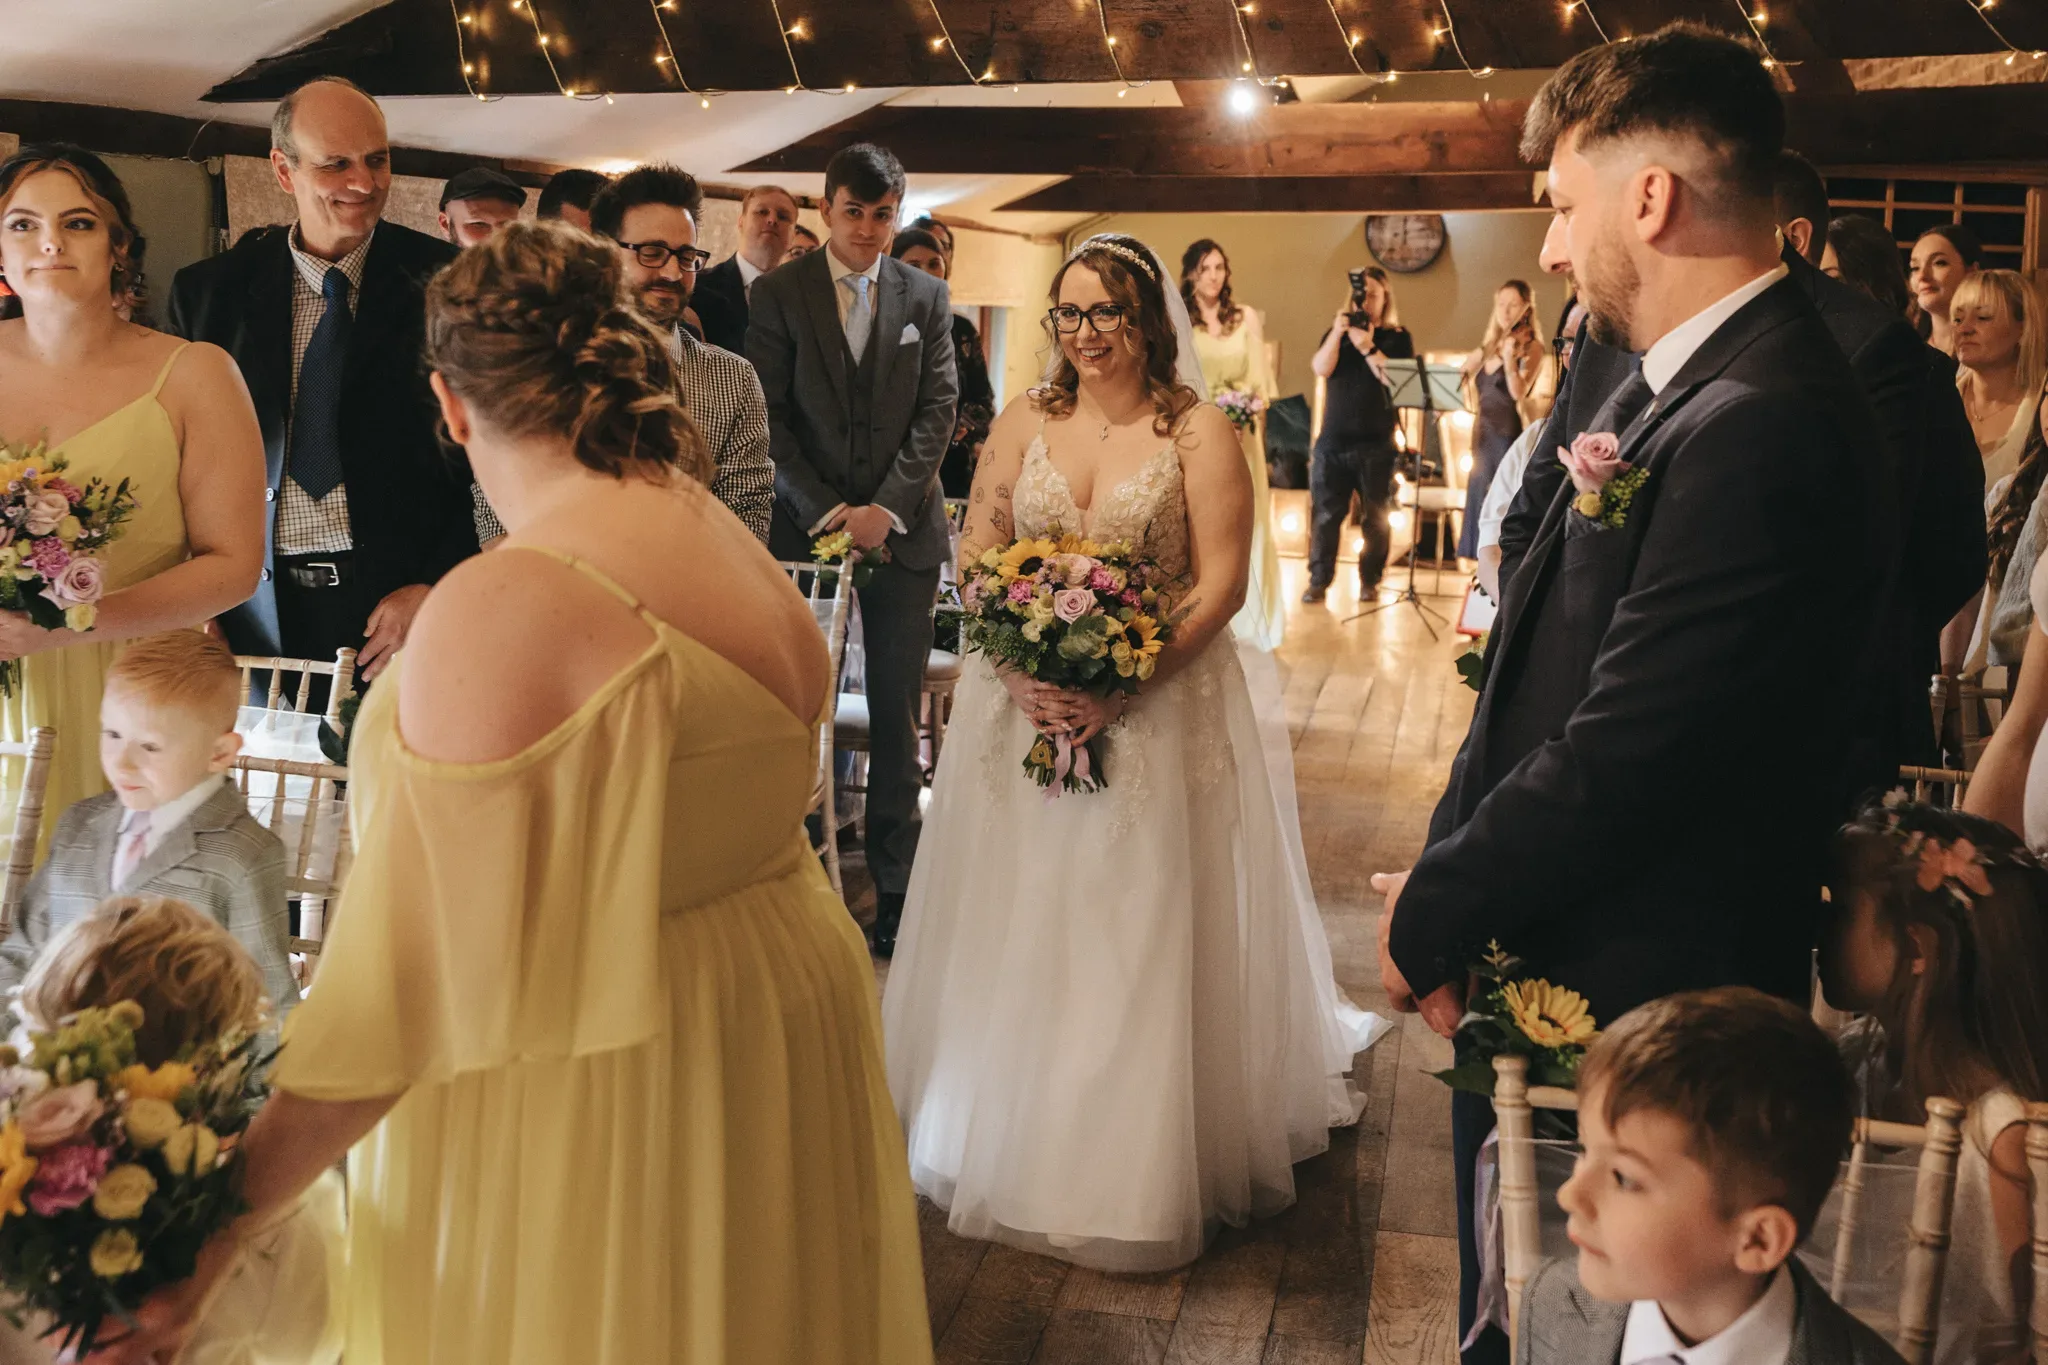 A joyful bride, holding a bouquet, walks down the aisle accompanied by bridesmaids in yellow dresses and a young page boy, as guests and the groom look on fondly in a warmly lit rustic wedding venue.